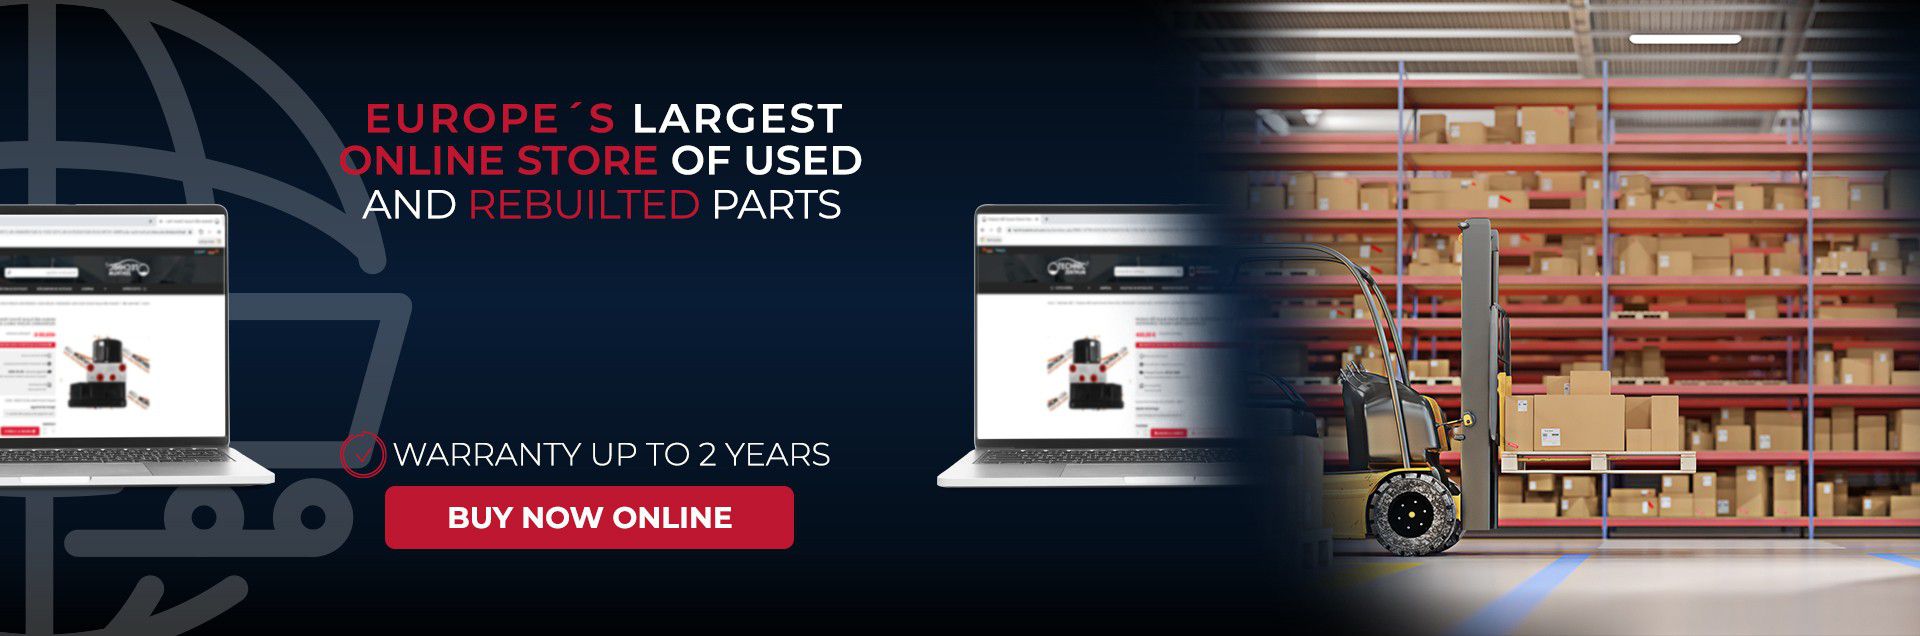 Europe's largest online store of used and rebuilted parts